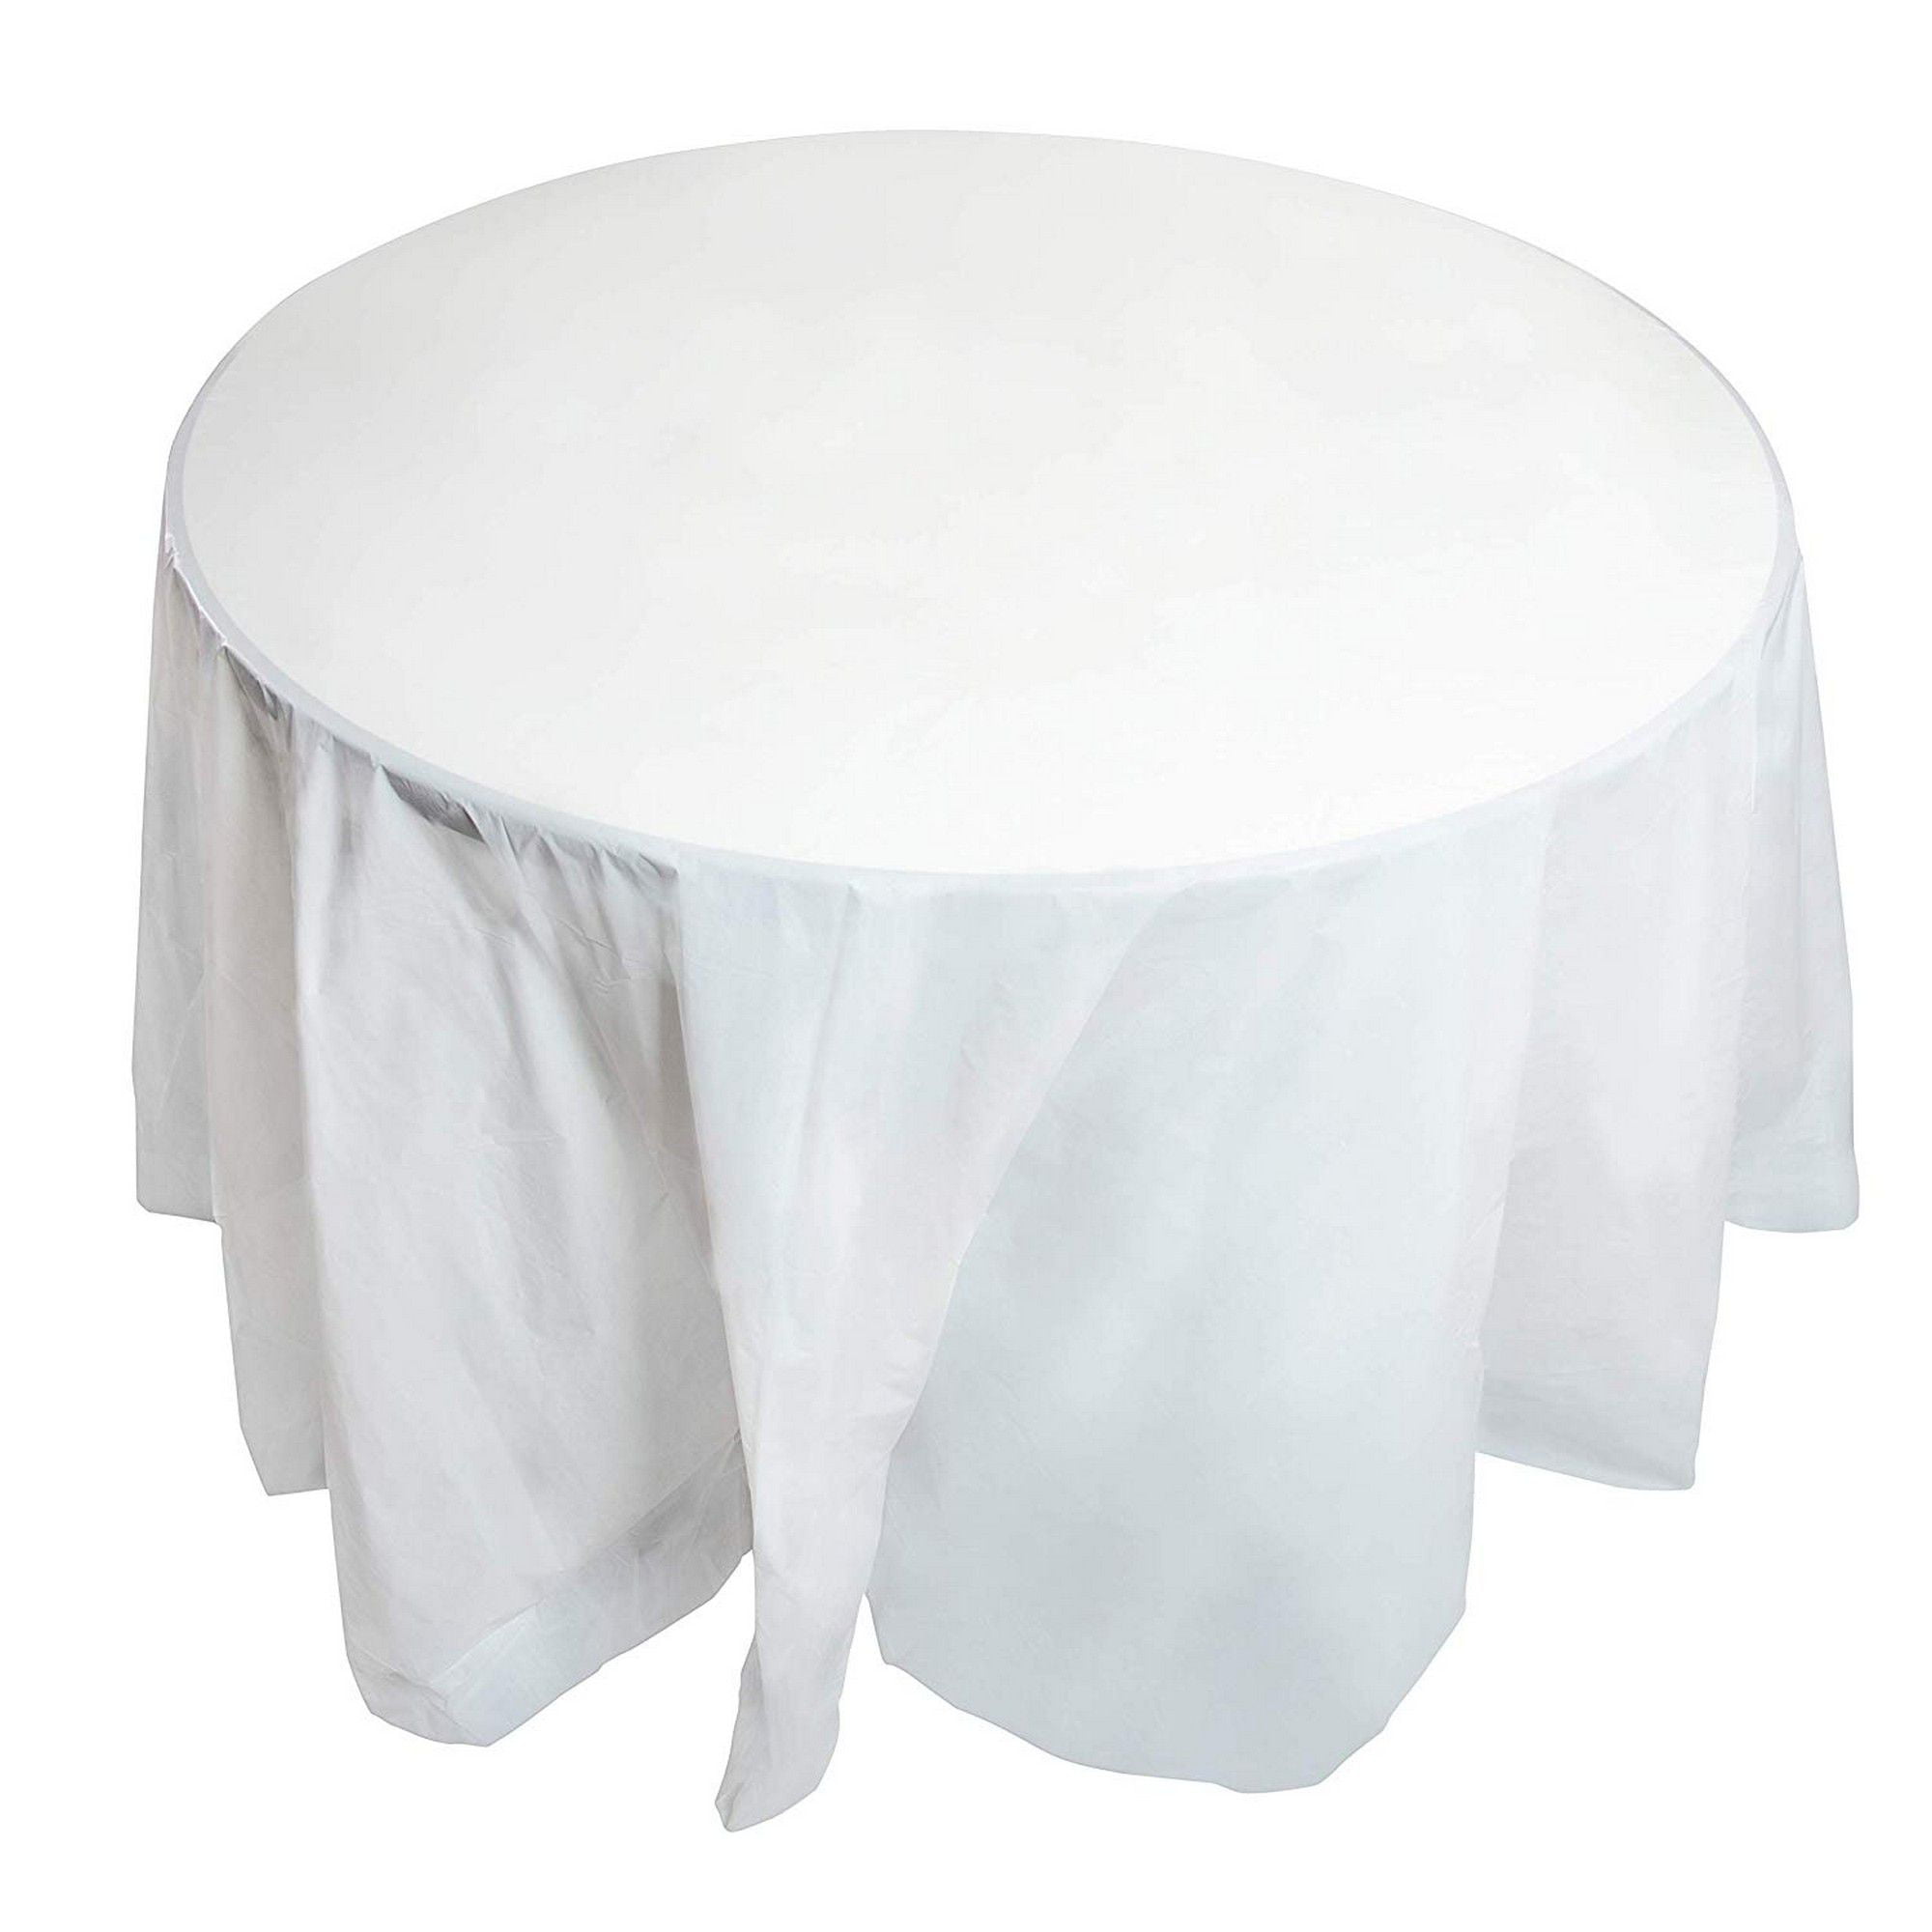 12 Pack White Plastic Tablecloth Round, Round Table Party Packages